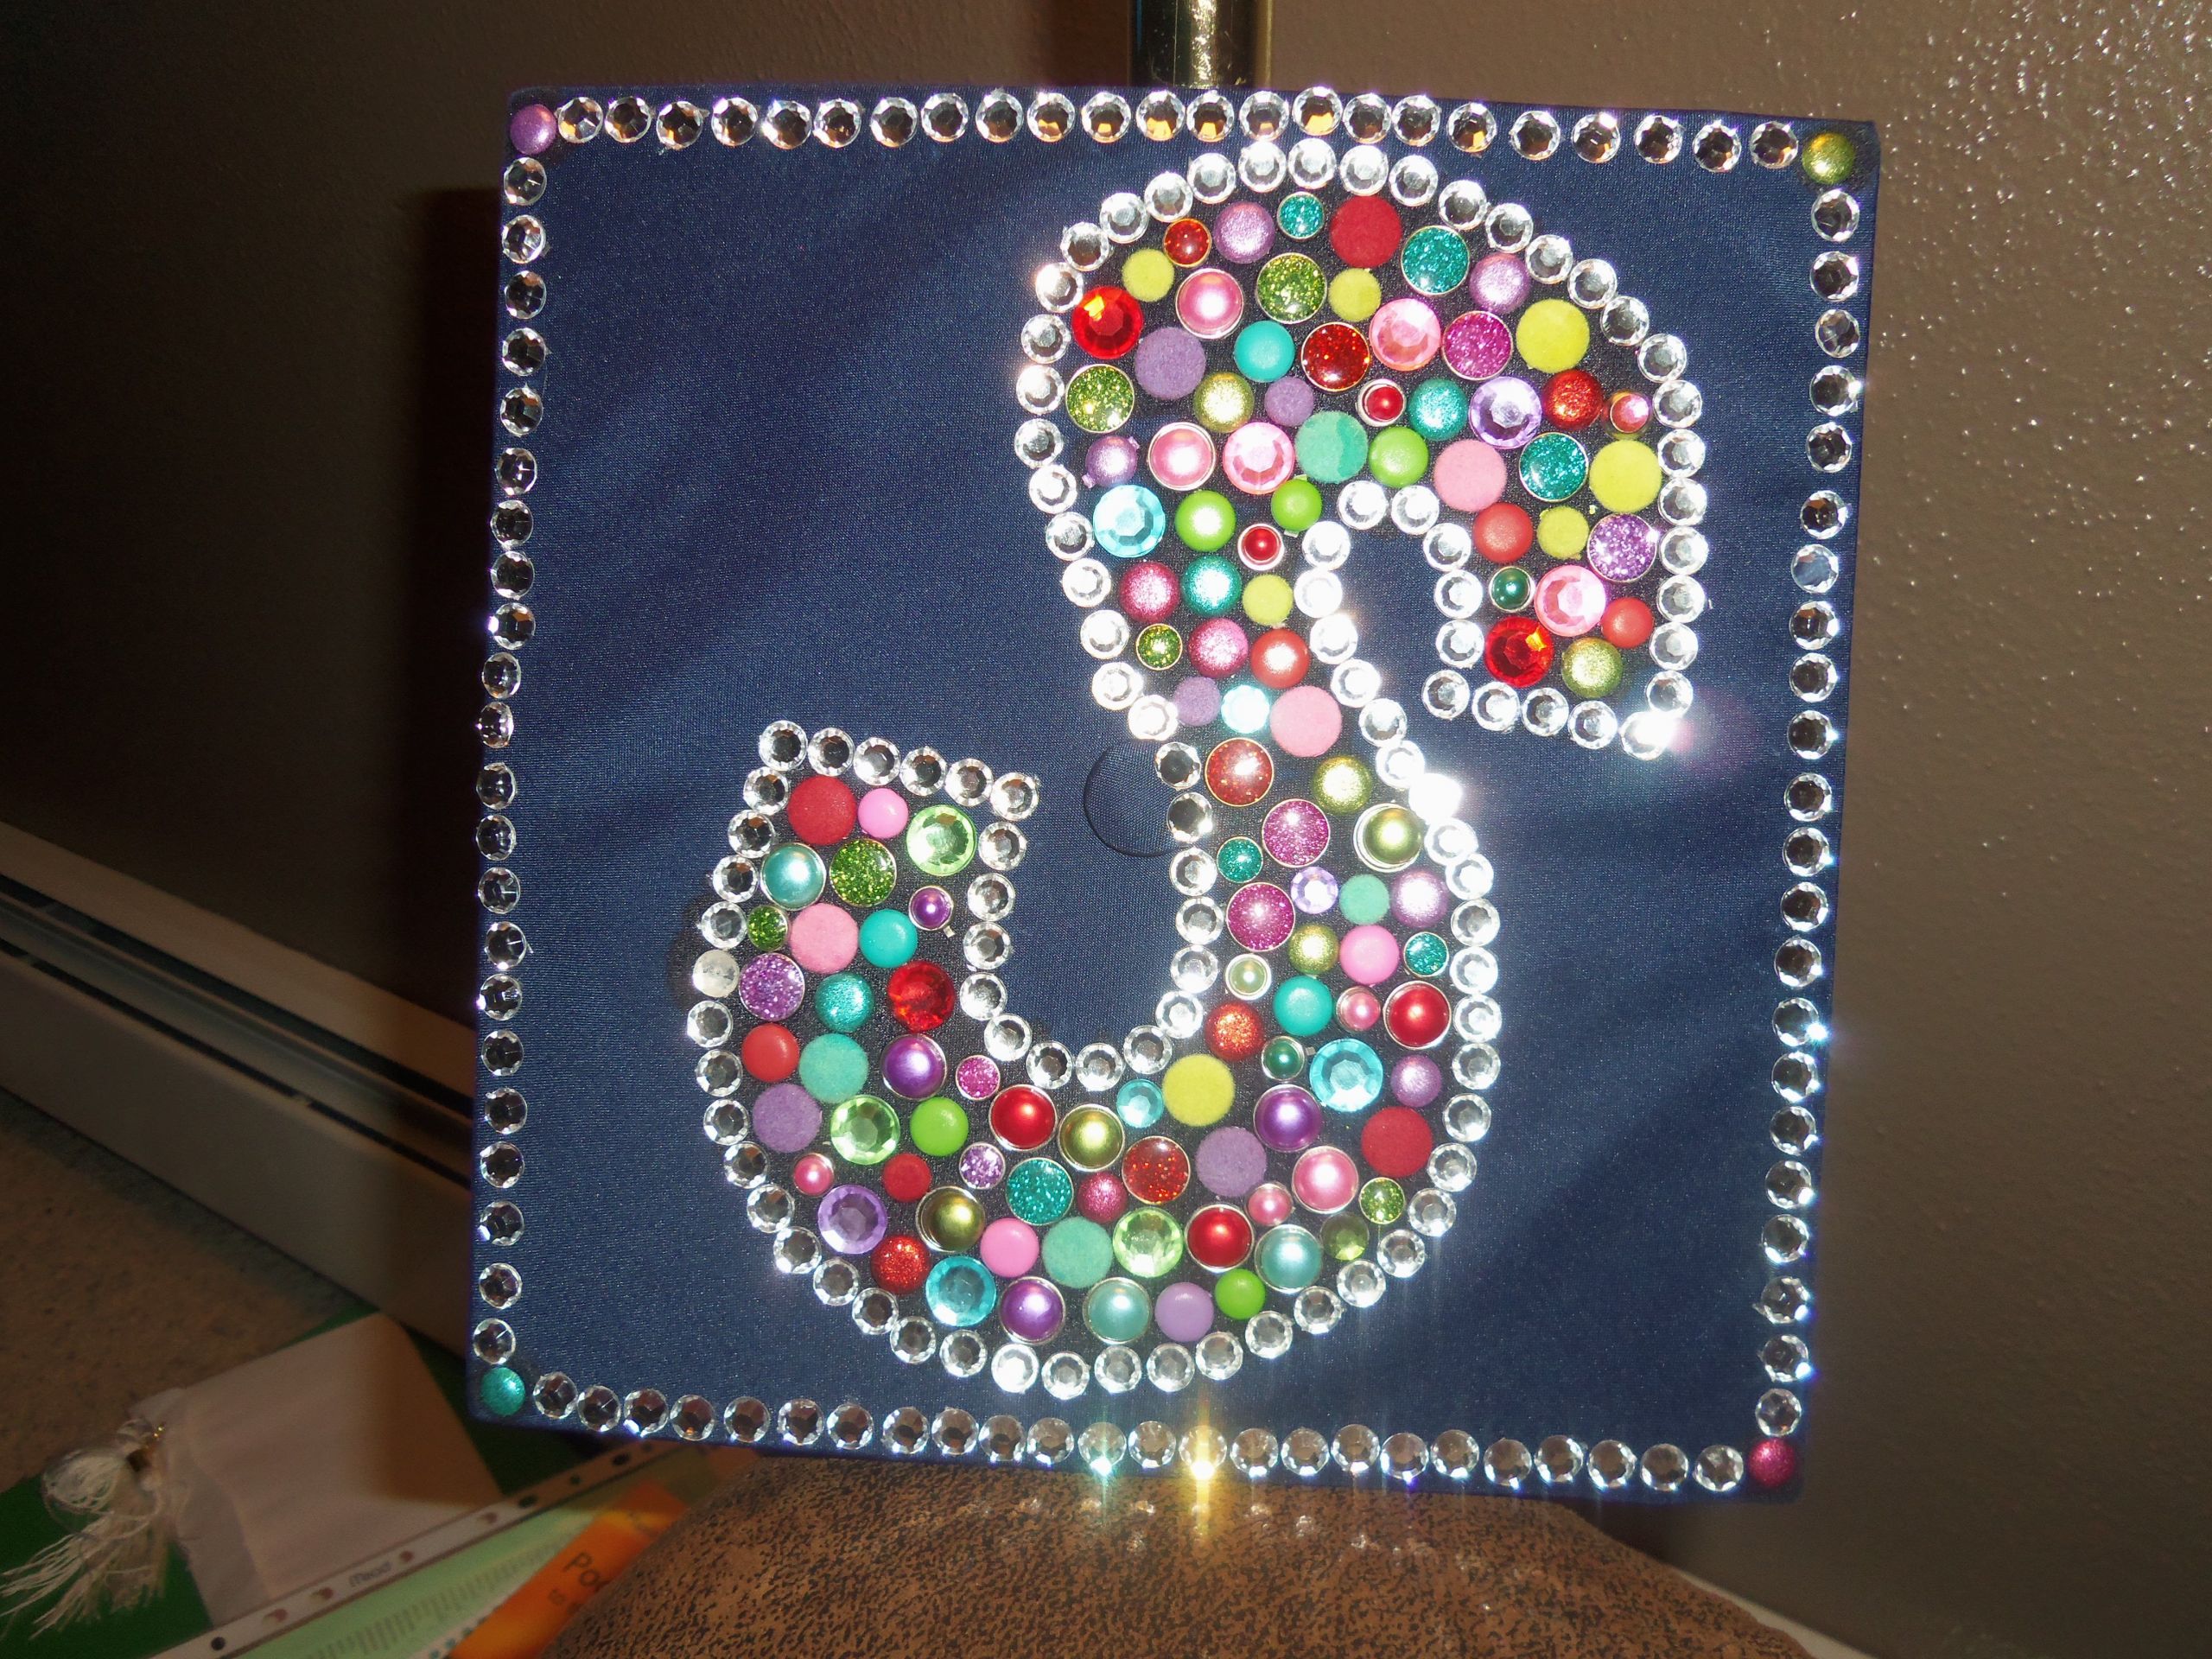 Surgical Tech Graduation Party Ideas
 Decorated graduation hat "S" for Surgical Technologist